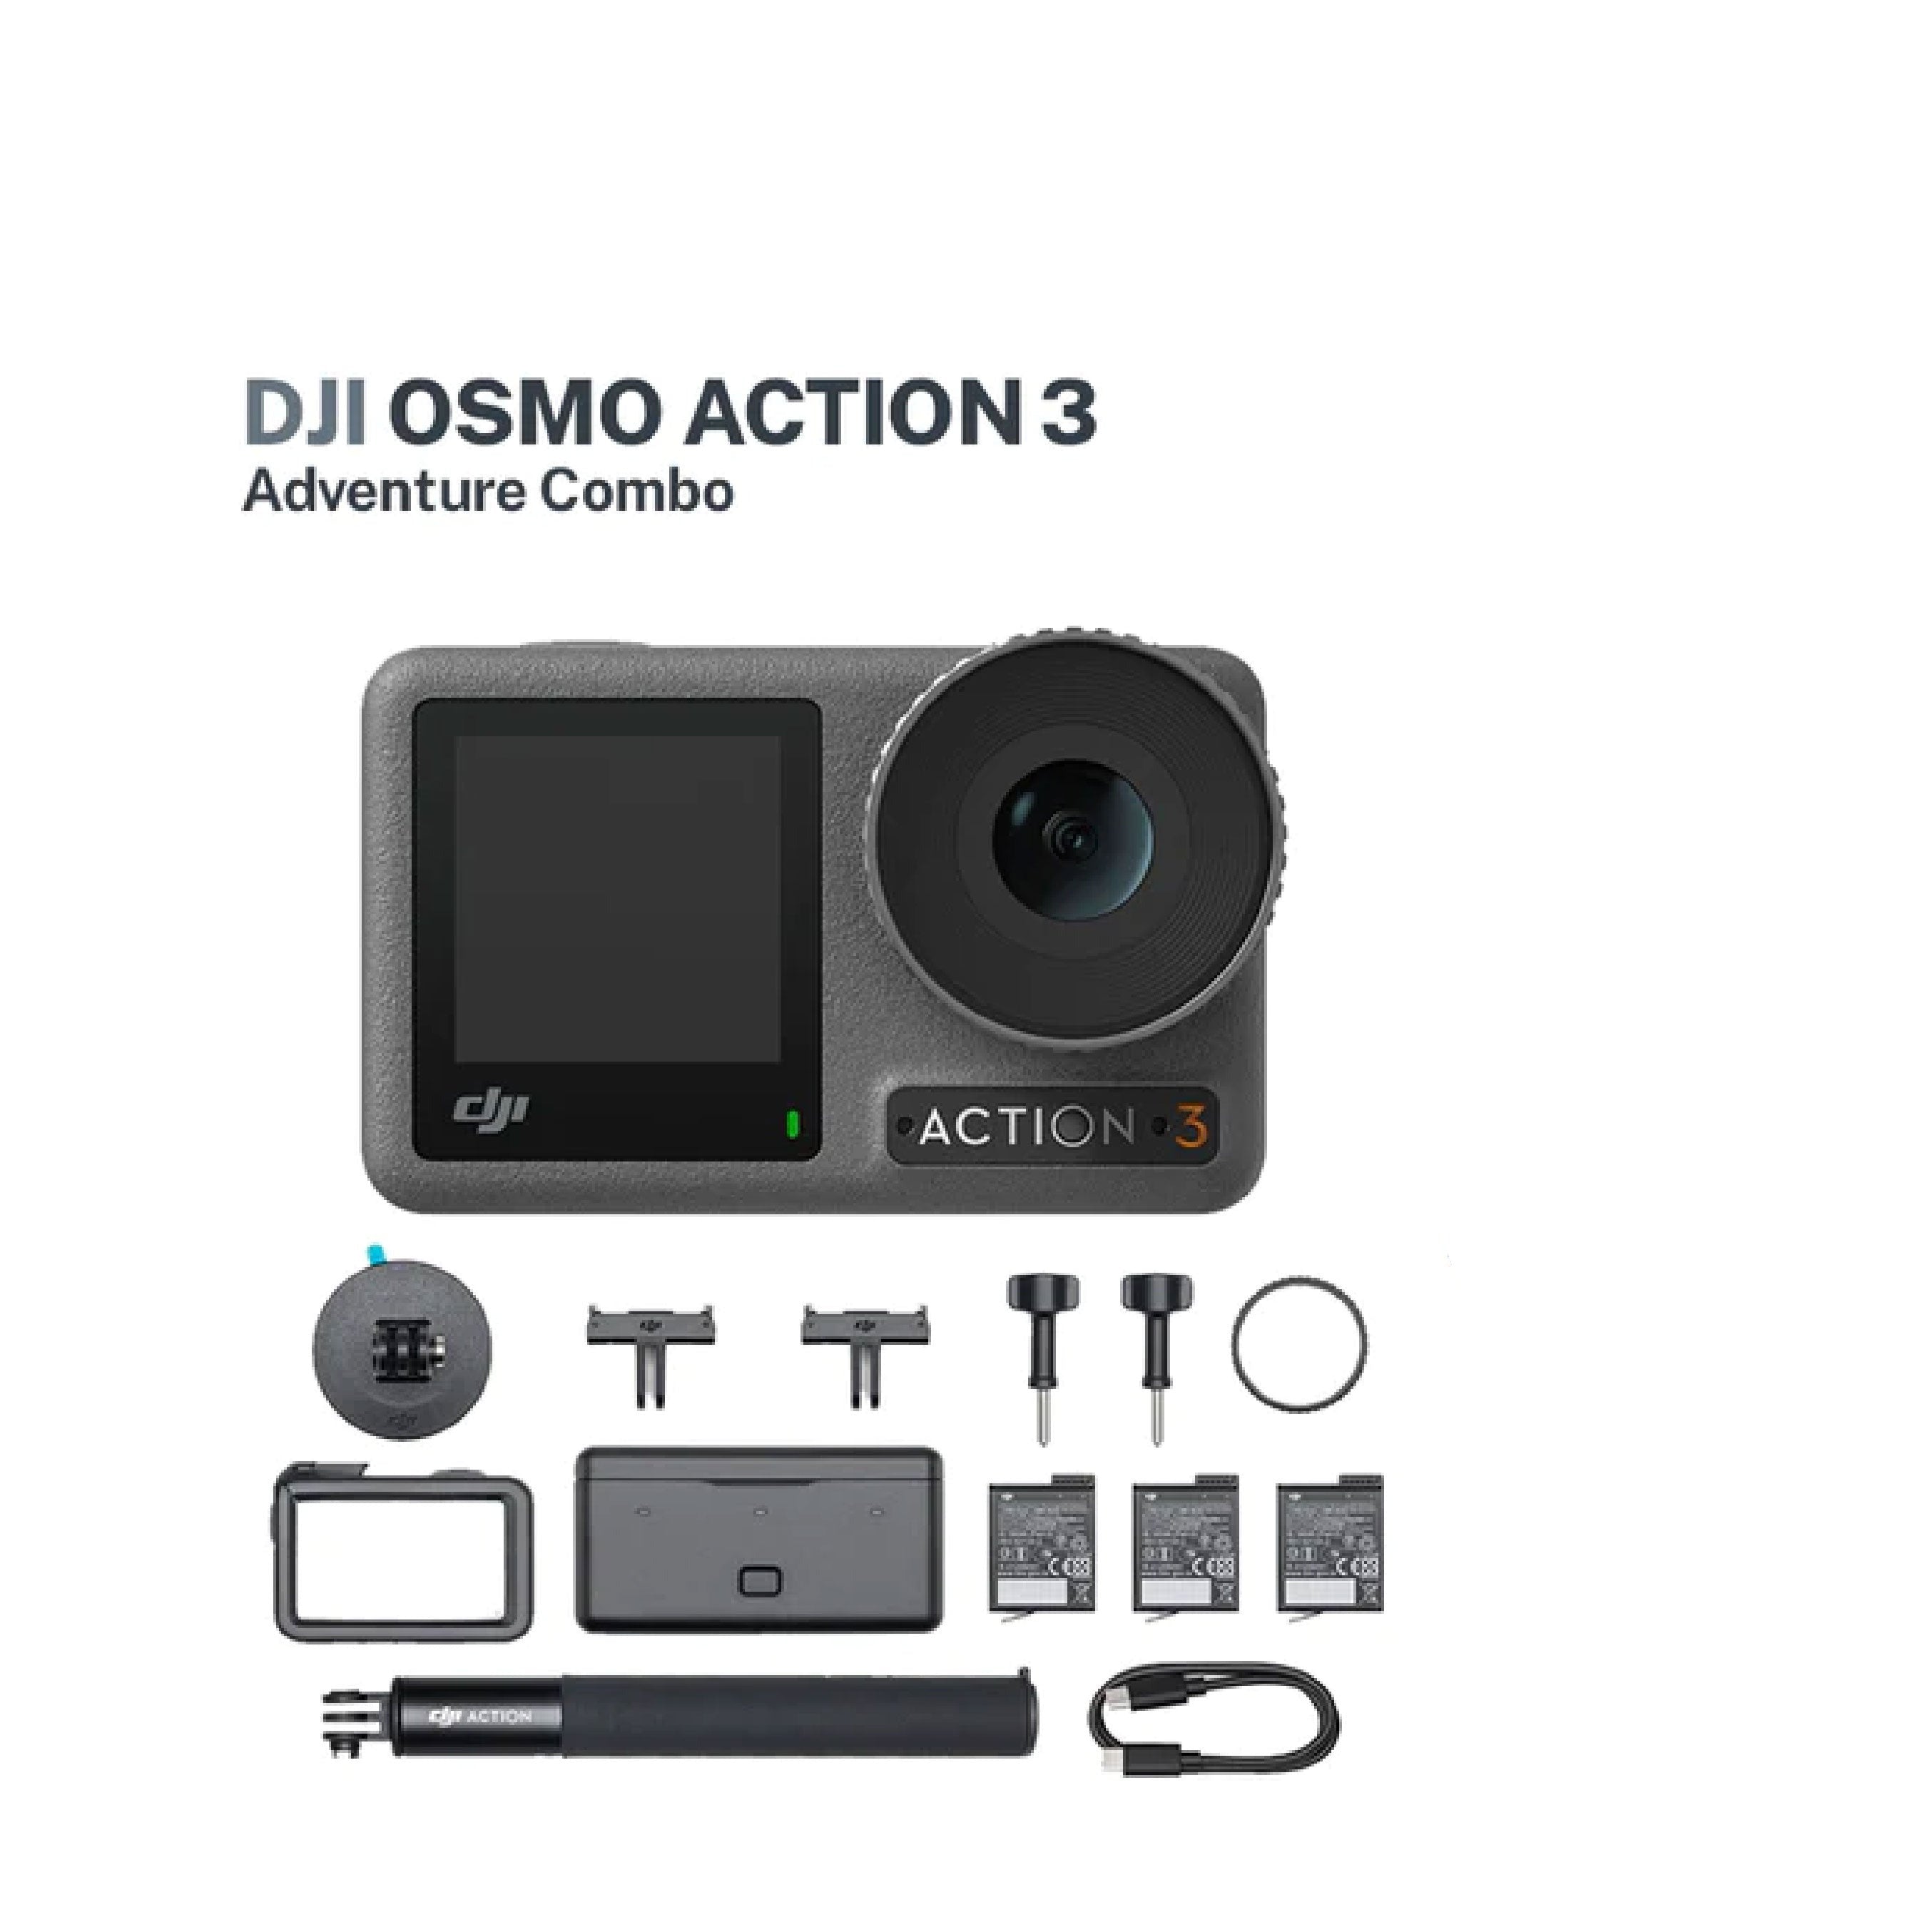 DJI Osmo Action 4 Adventure Combo with Free Sandisk Extreme MicroSD 64